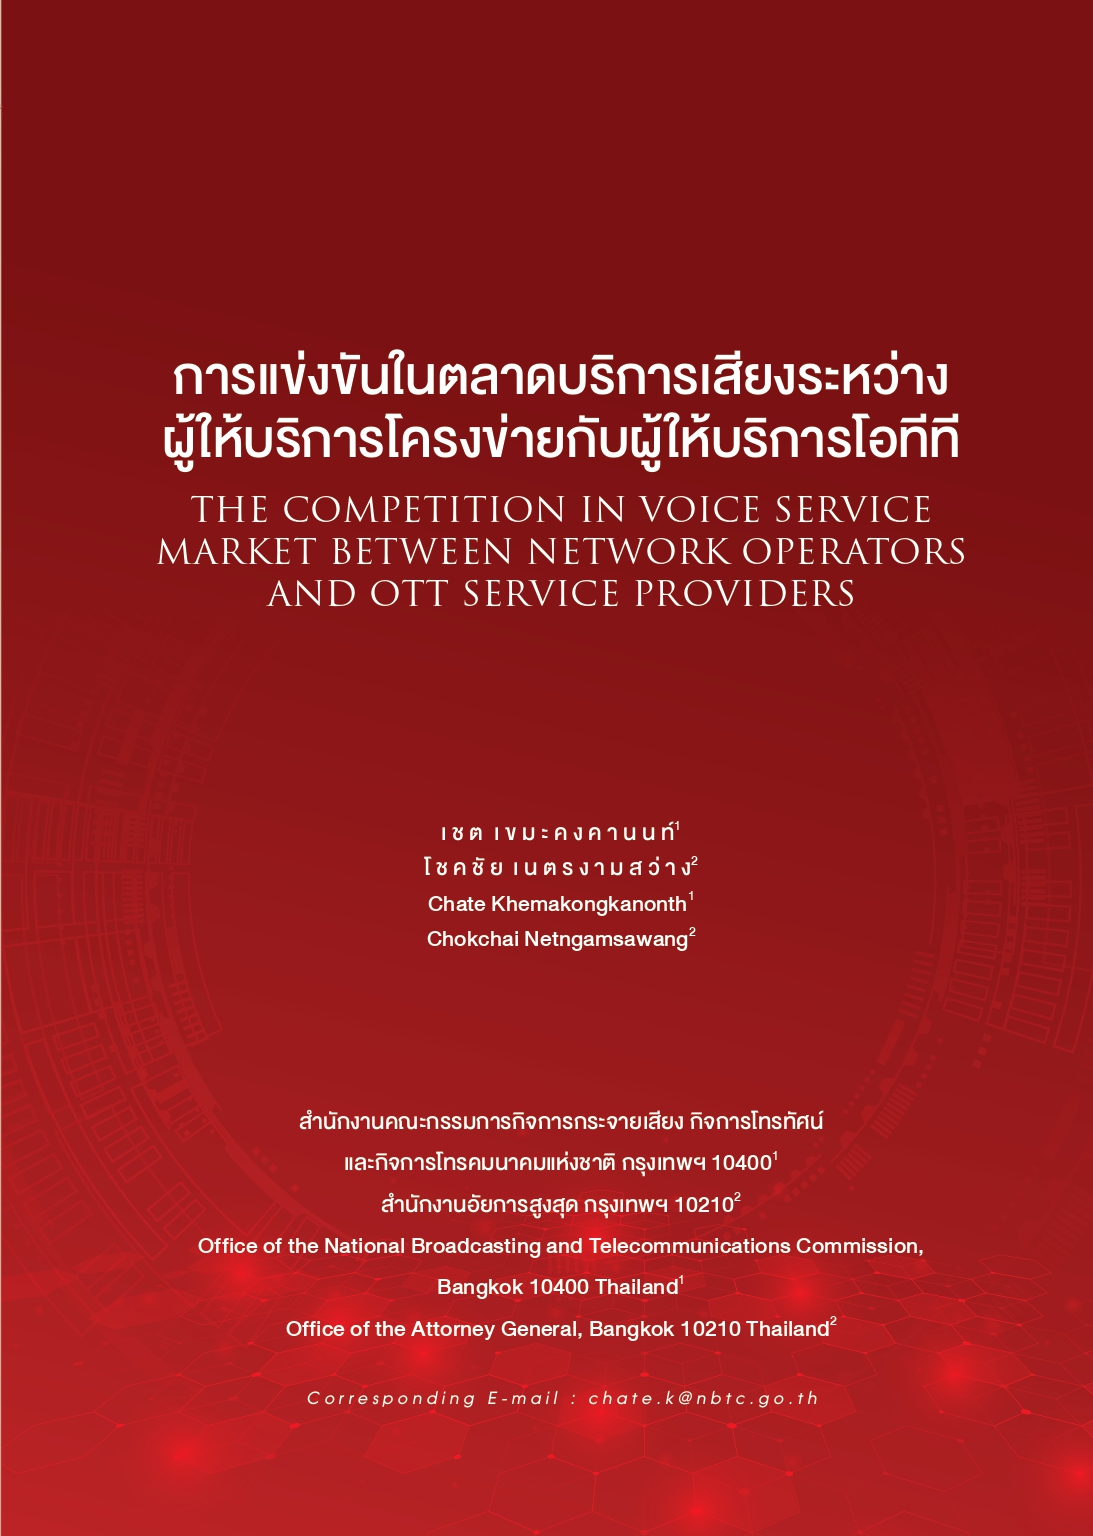 THE COMPETITION IN VOICE SERVICE MARKET BETWEEN NETWORK OPERATORS AND OTT SERVICE PROVIDERS